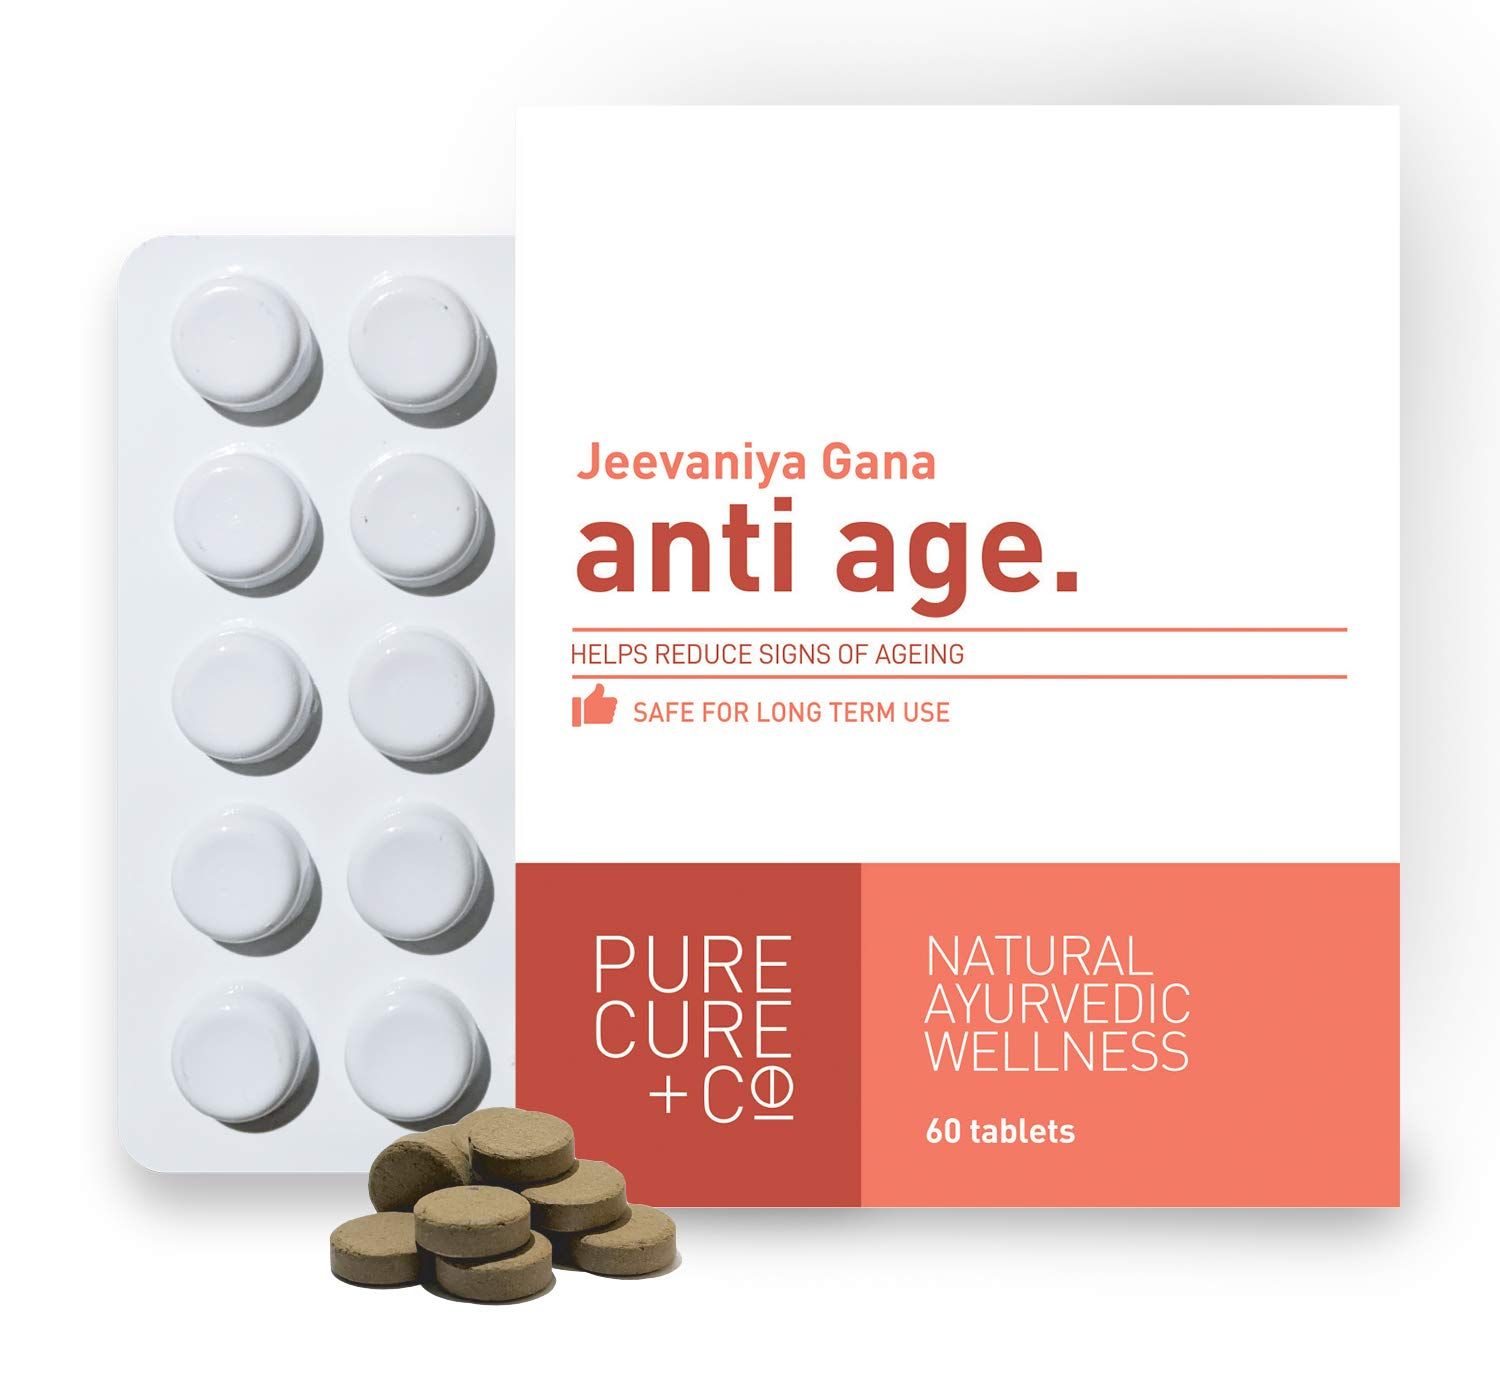 Pure Cure +Co Anti Age Tablets Image